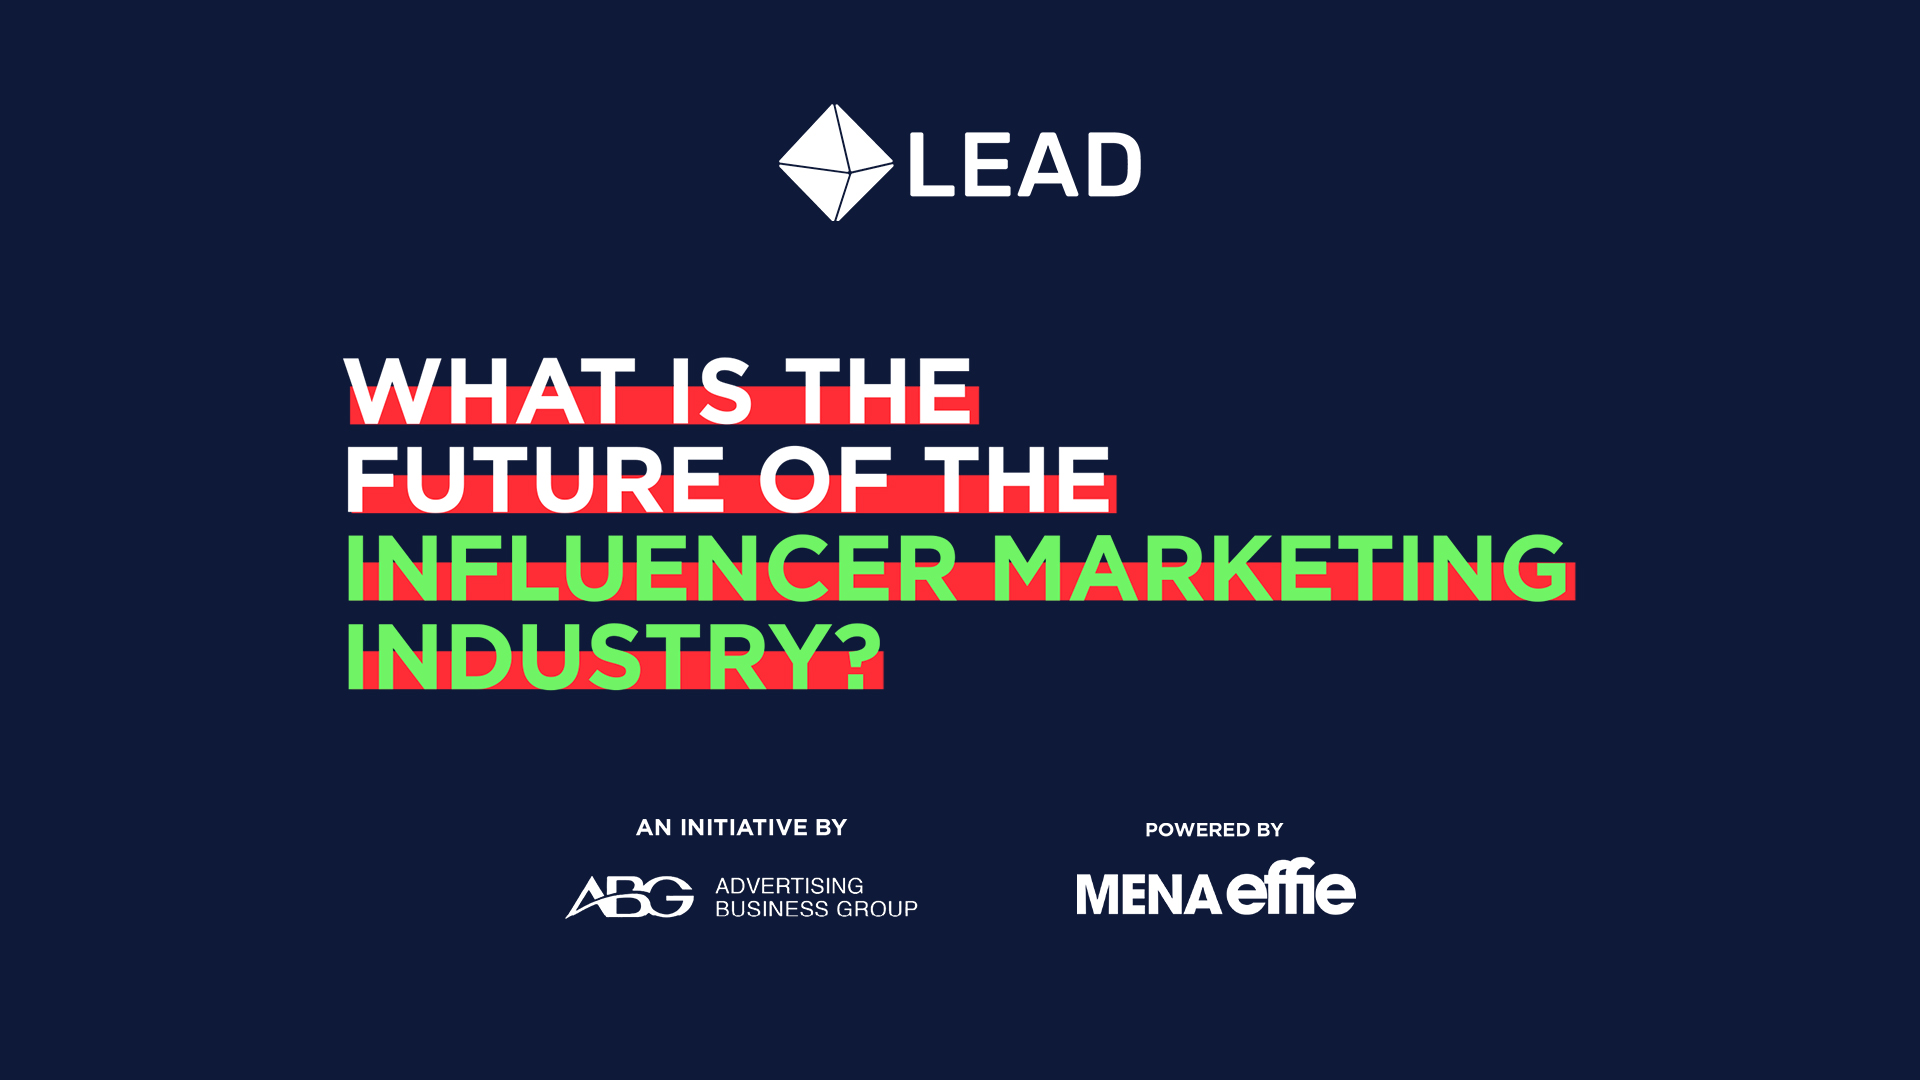 What Is the Future of the Influencer Marketing Industry?